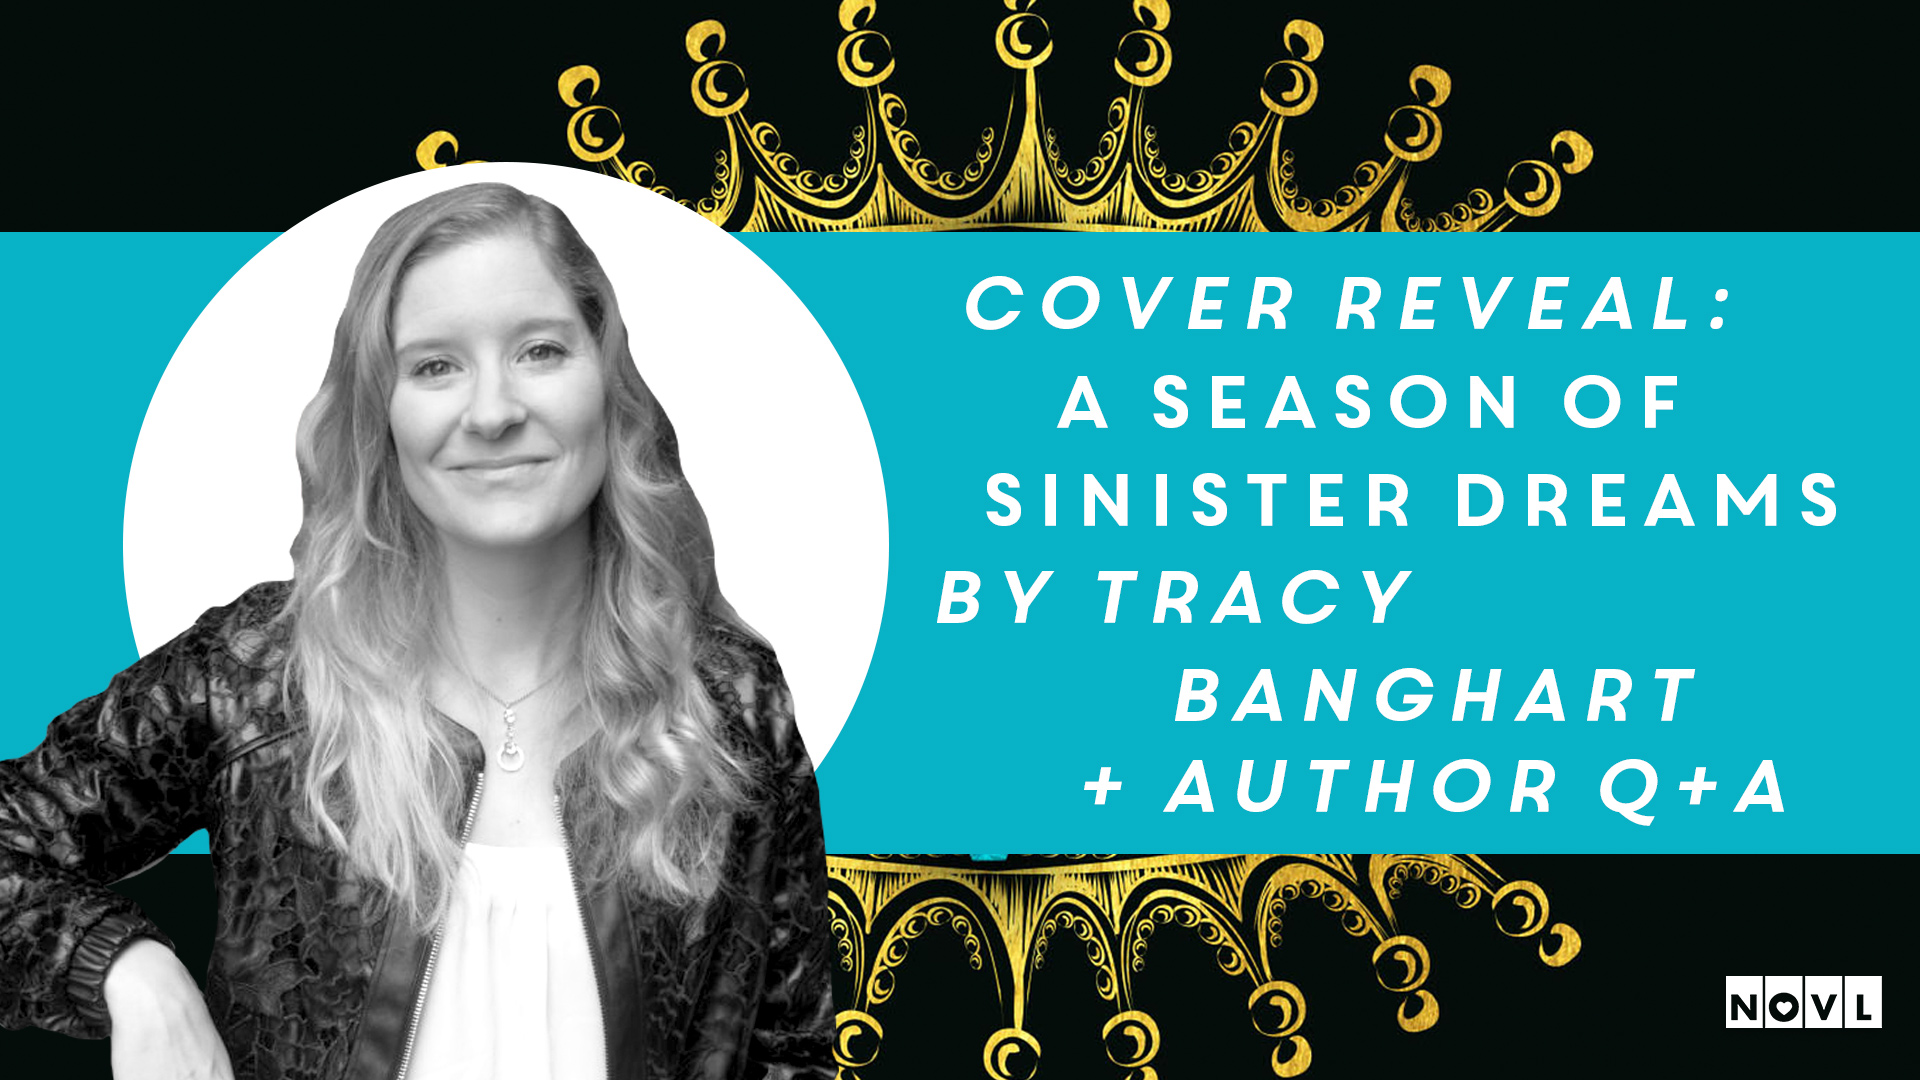 The NOVL Blog, Featured Image for Article: Cover Reveal: A Season of Sinister Dreams by Tracy Banghart with Q&A